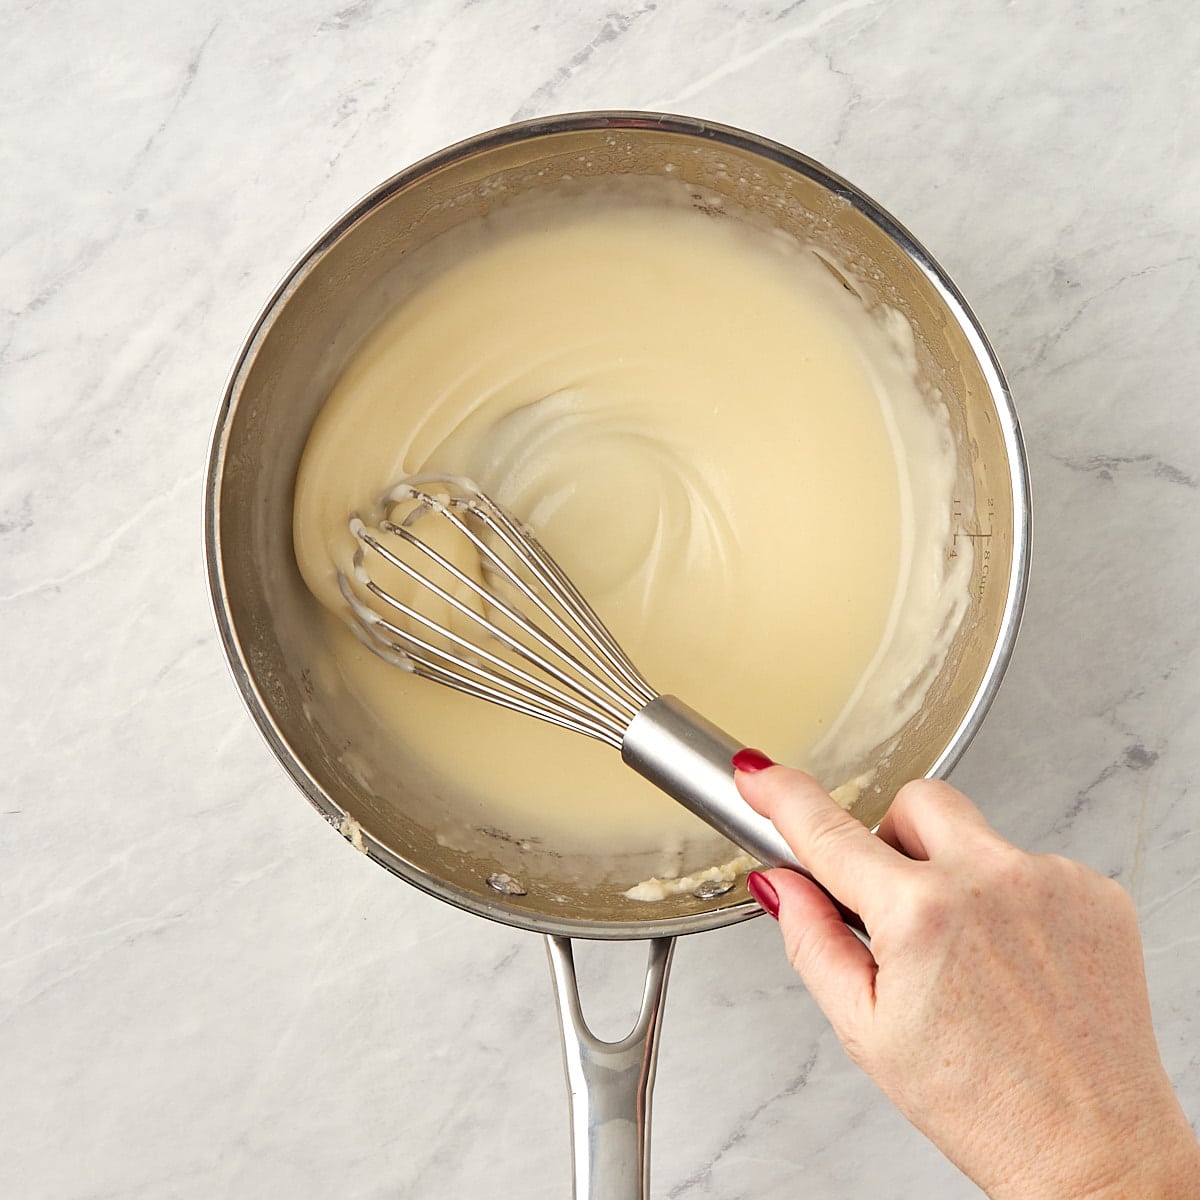 roux being whisked in a skillet.